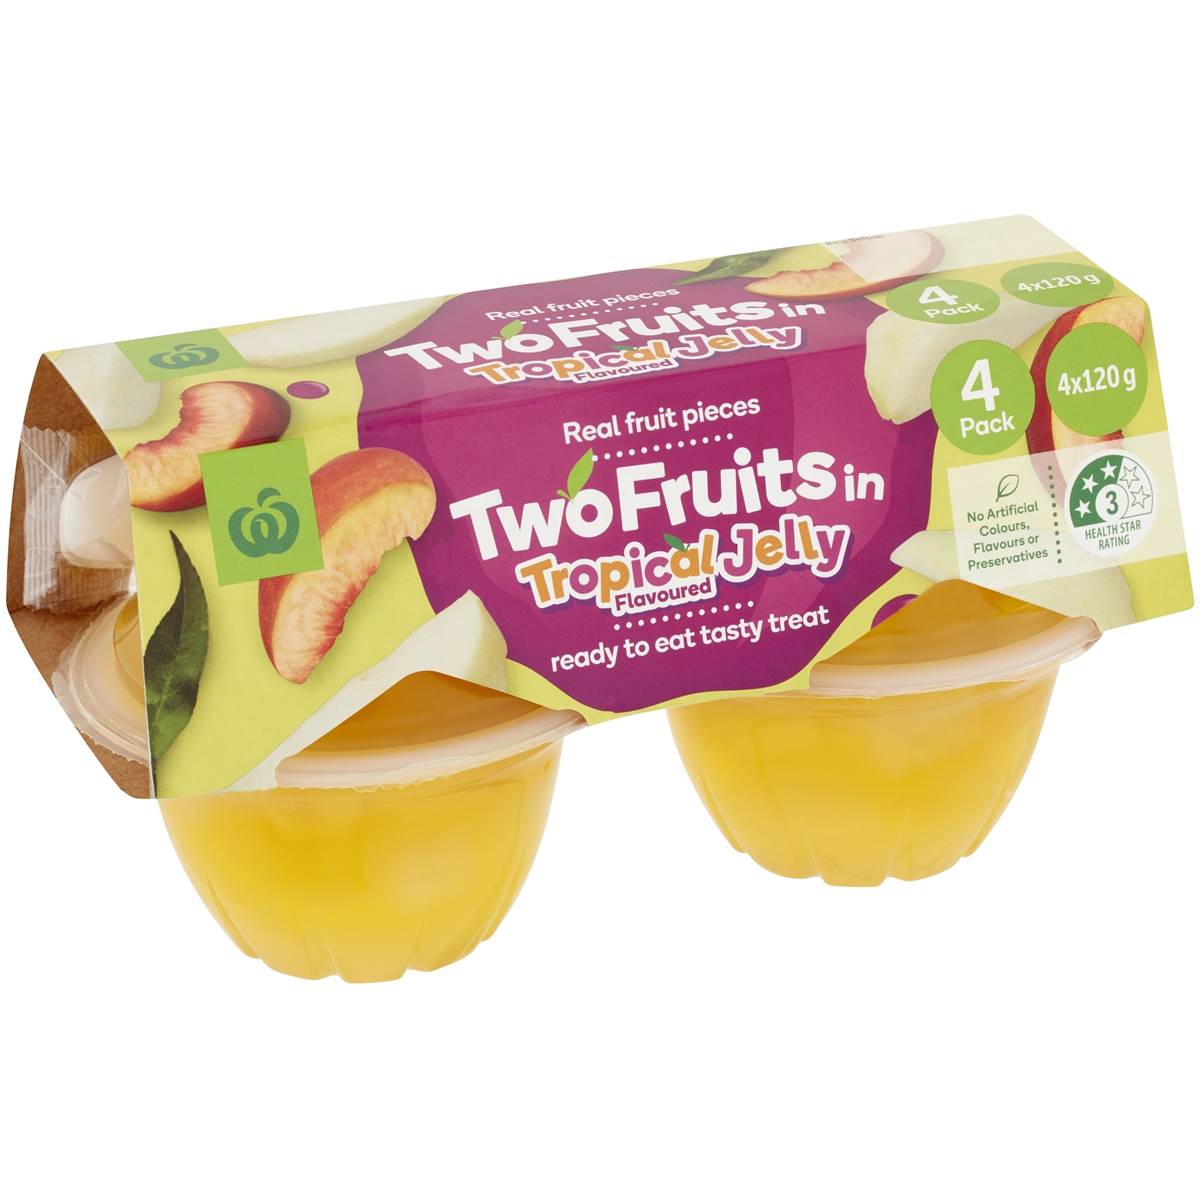 Calories in Woolworths Two Fruits In Tropical Jelly